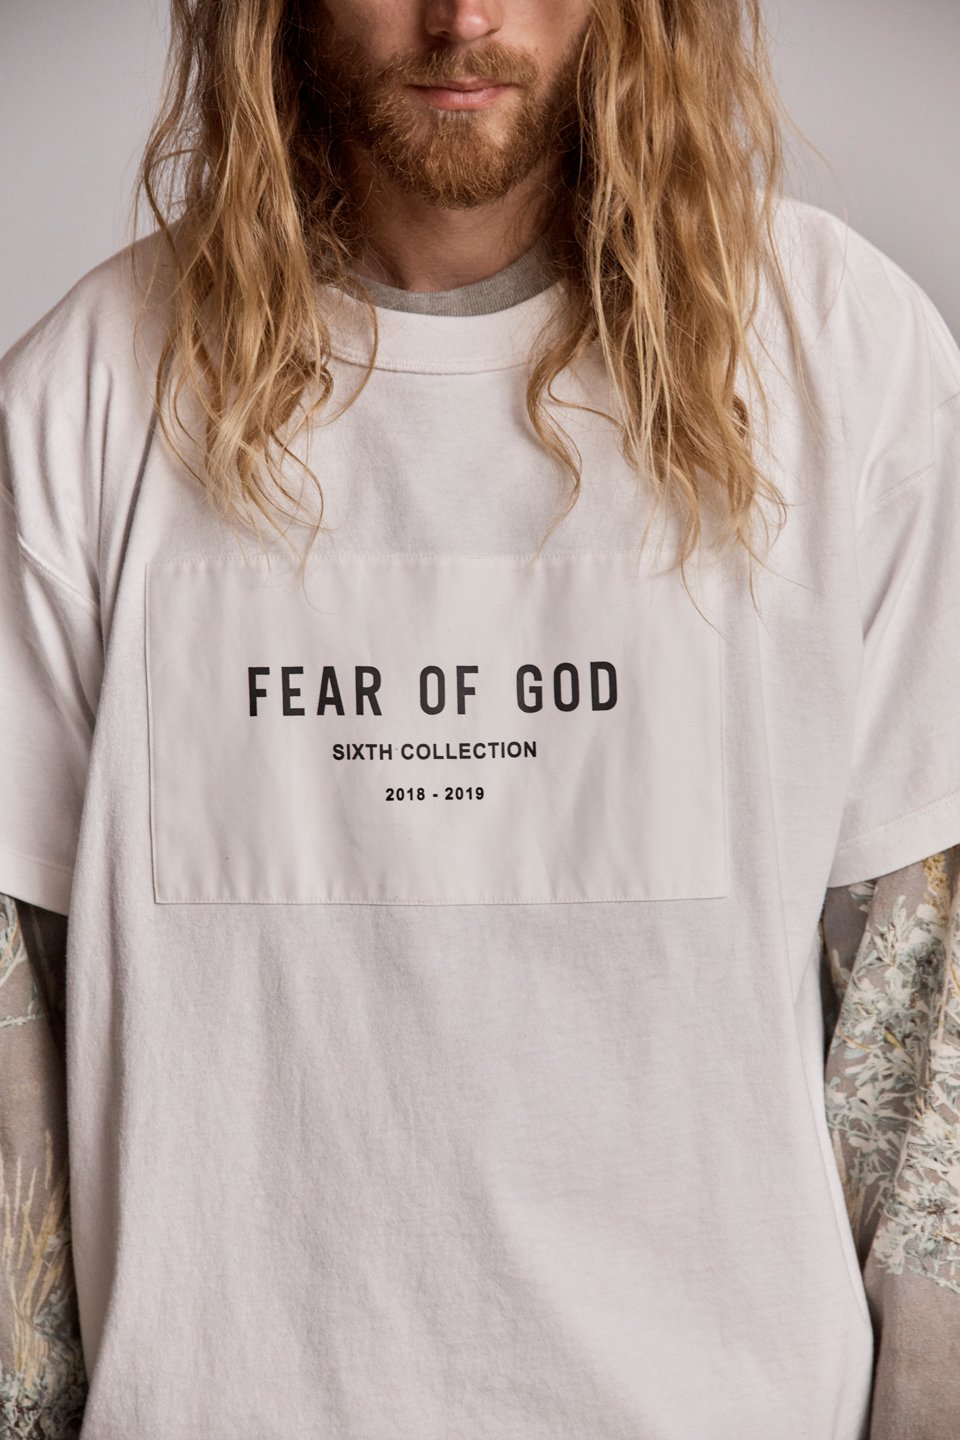 fear-of-god-sixth-collection-nike-collaboration-sneaker-lookbook